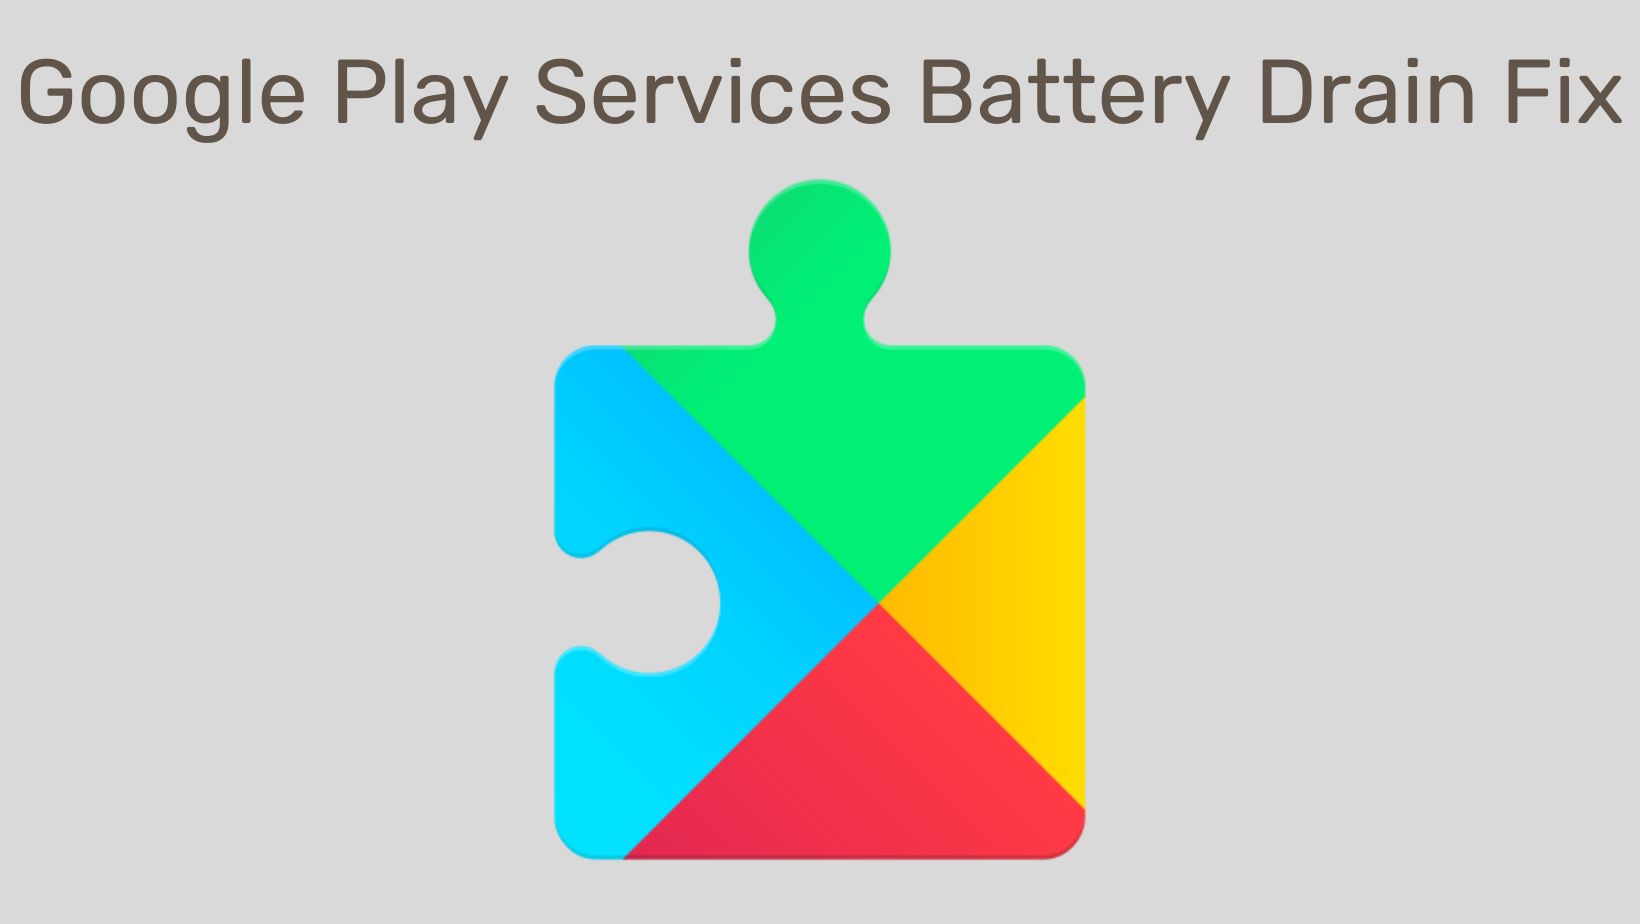 Google Play Services Battery Drain Fix